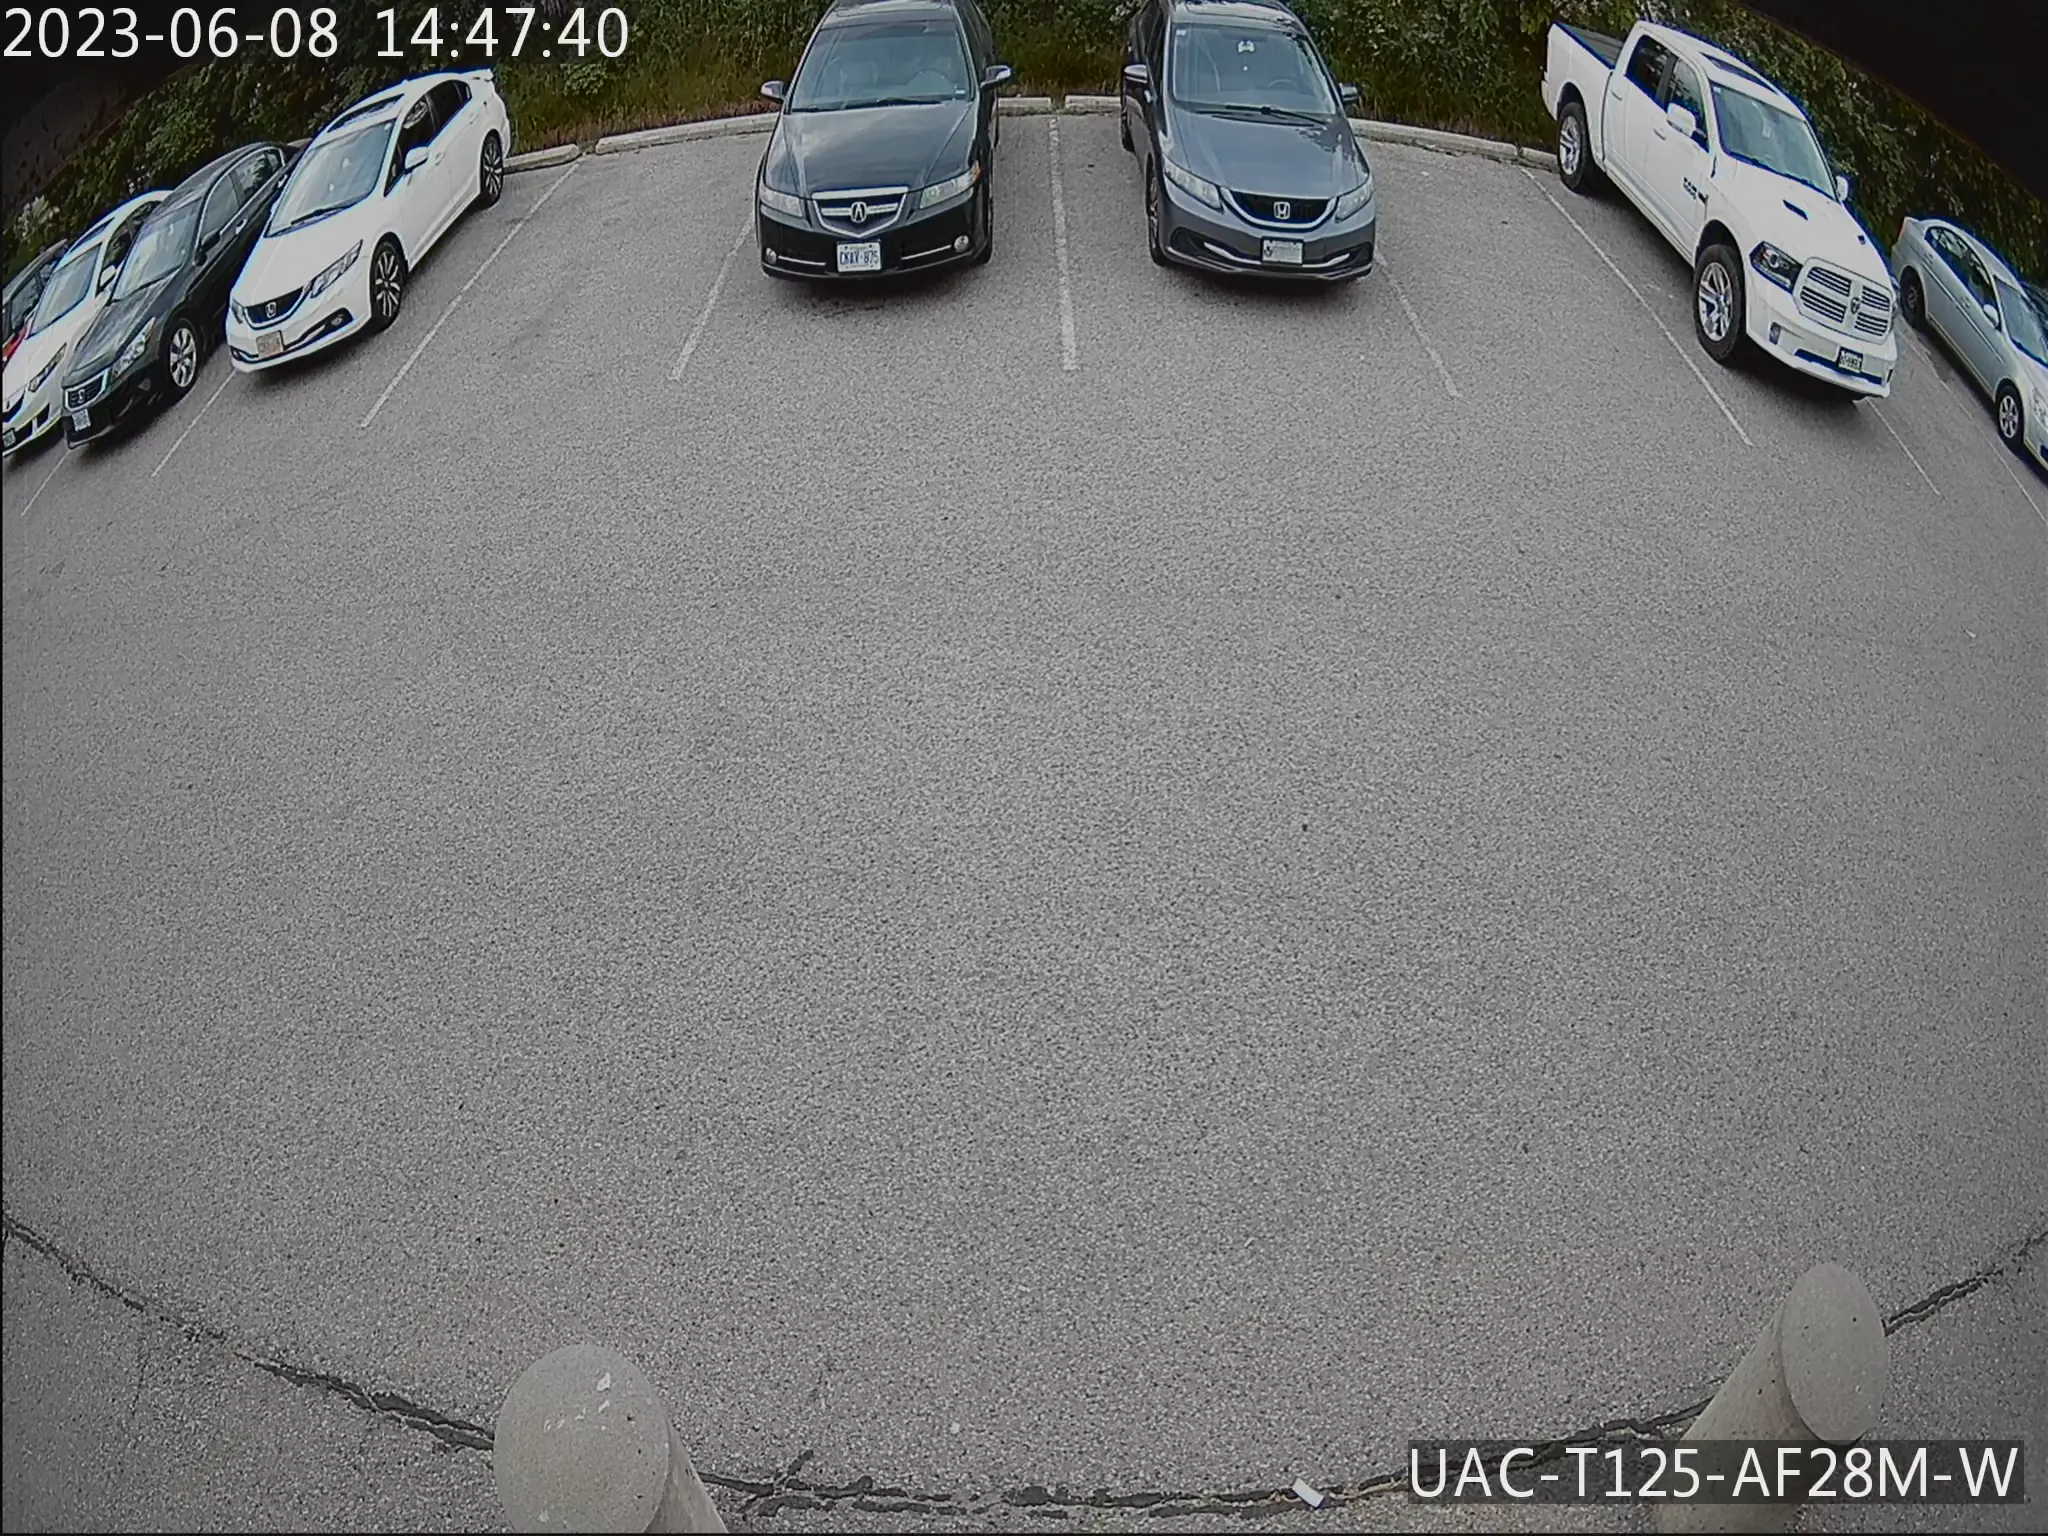 Security camera footage of a parking lot, slightly underexposed